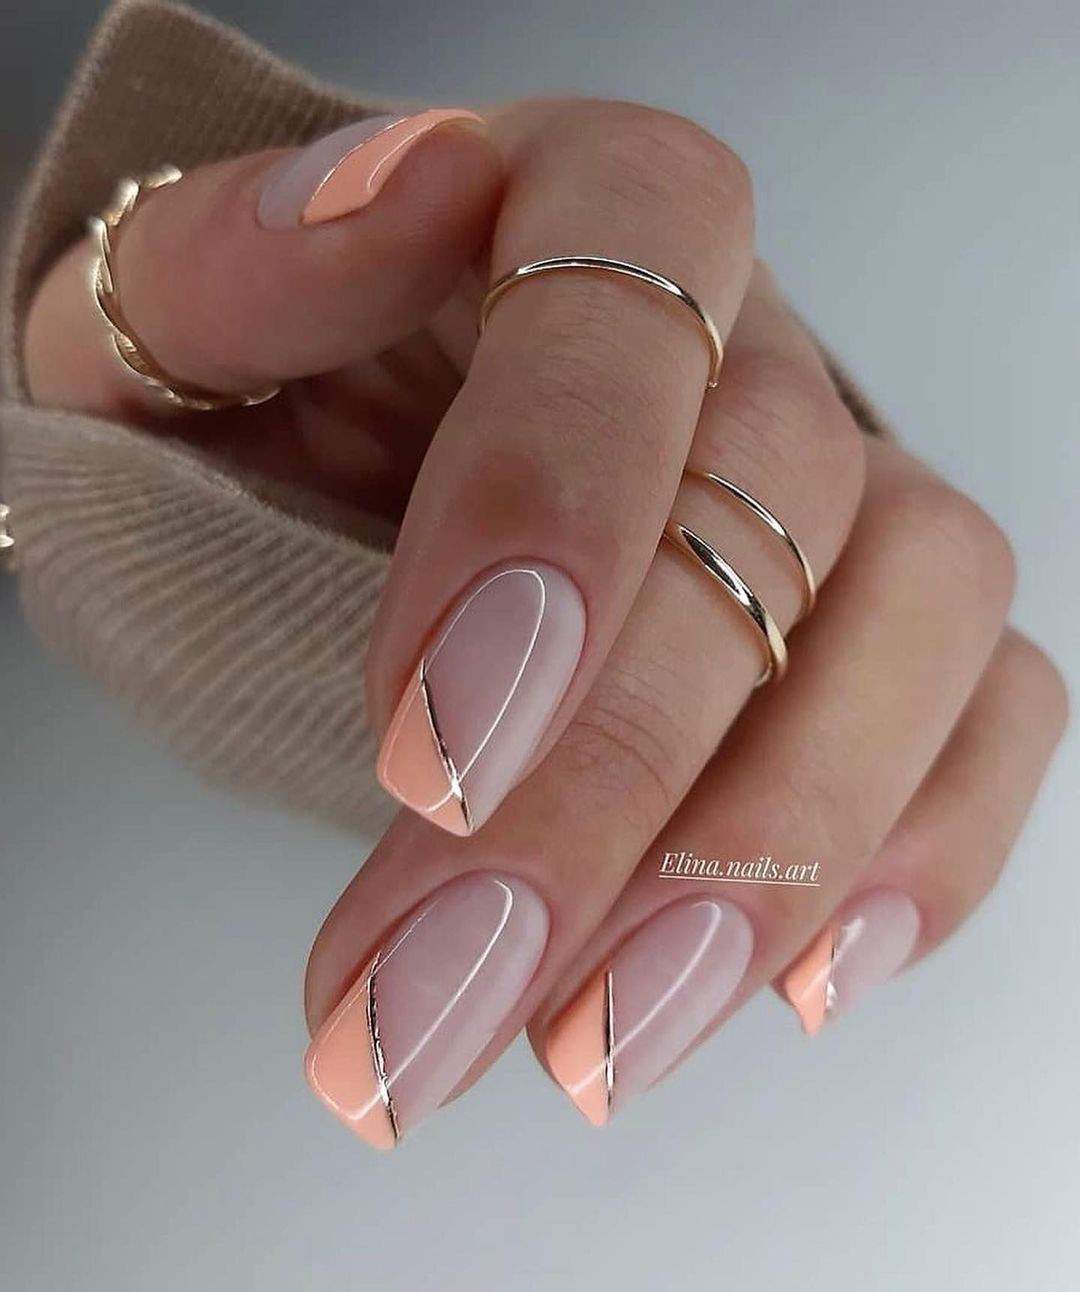 The 100+ Best Nail Designs Trends And Ideas In 2021 images 3